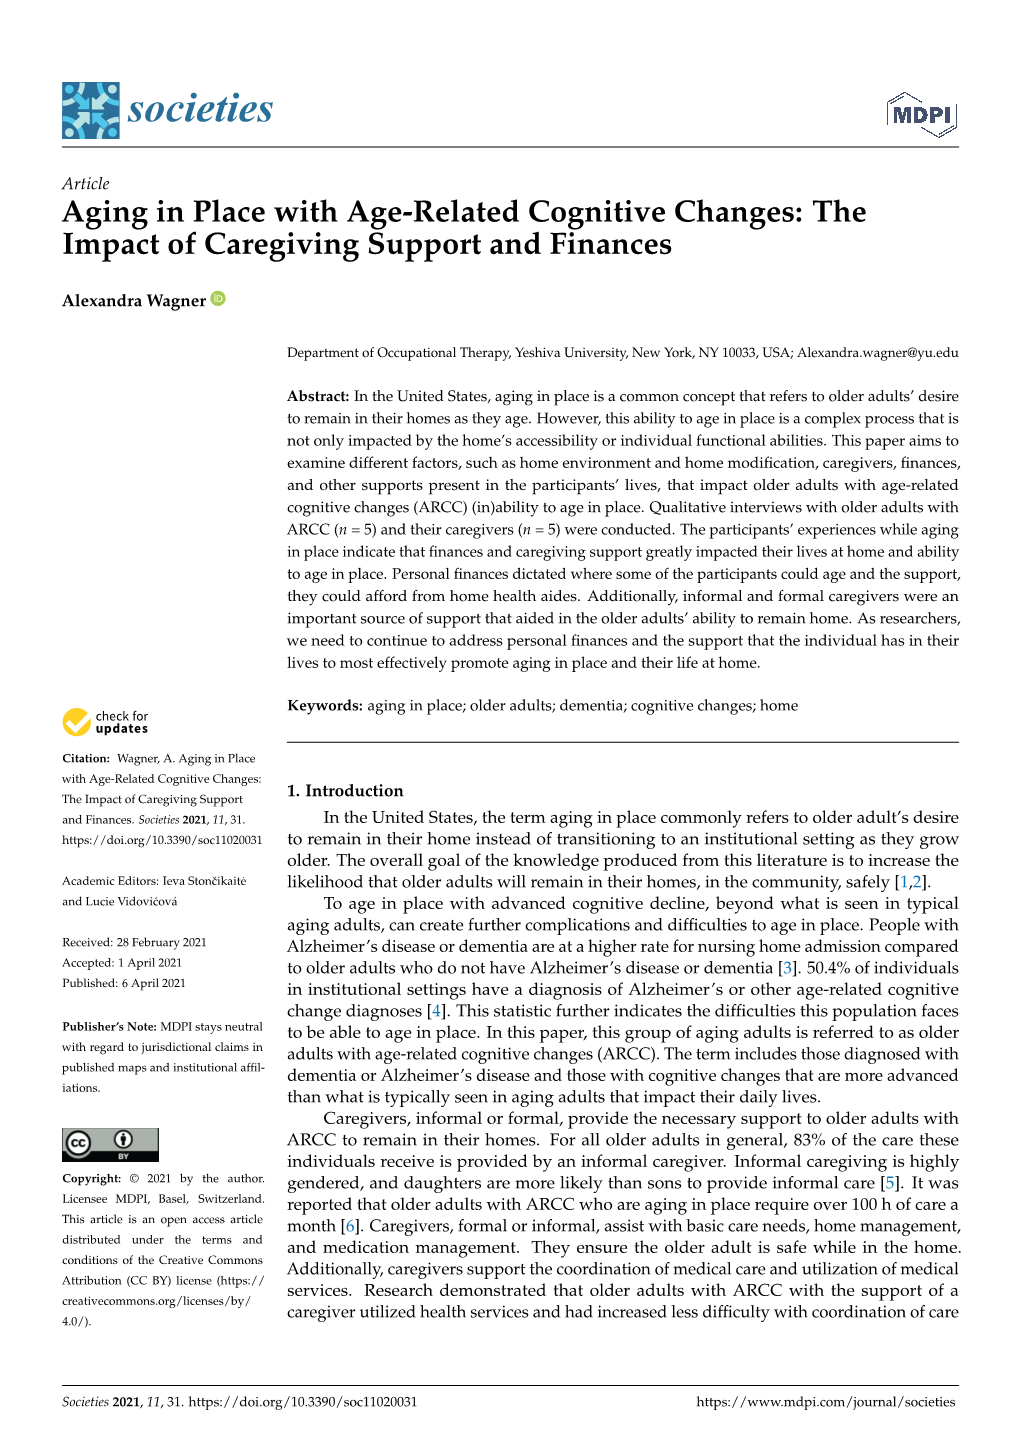 Aging in Place with Age-Related Cognitive Changes: the Impact of Caregiving Support and Finances